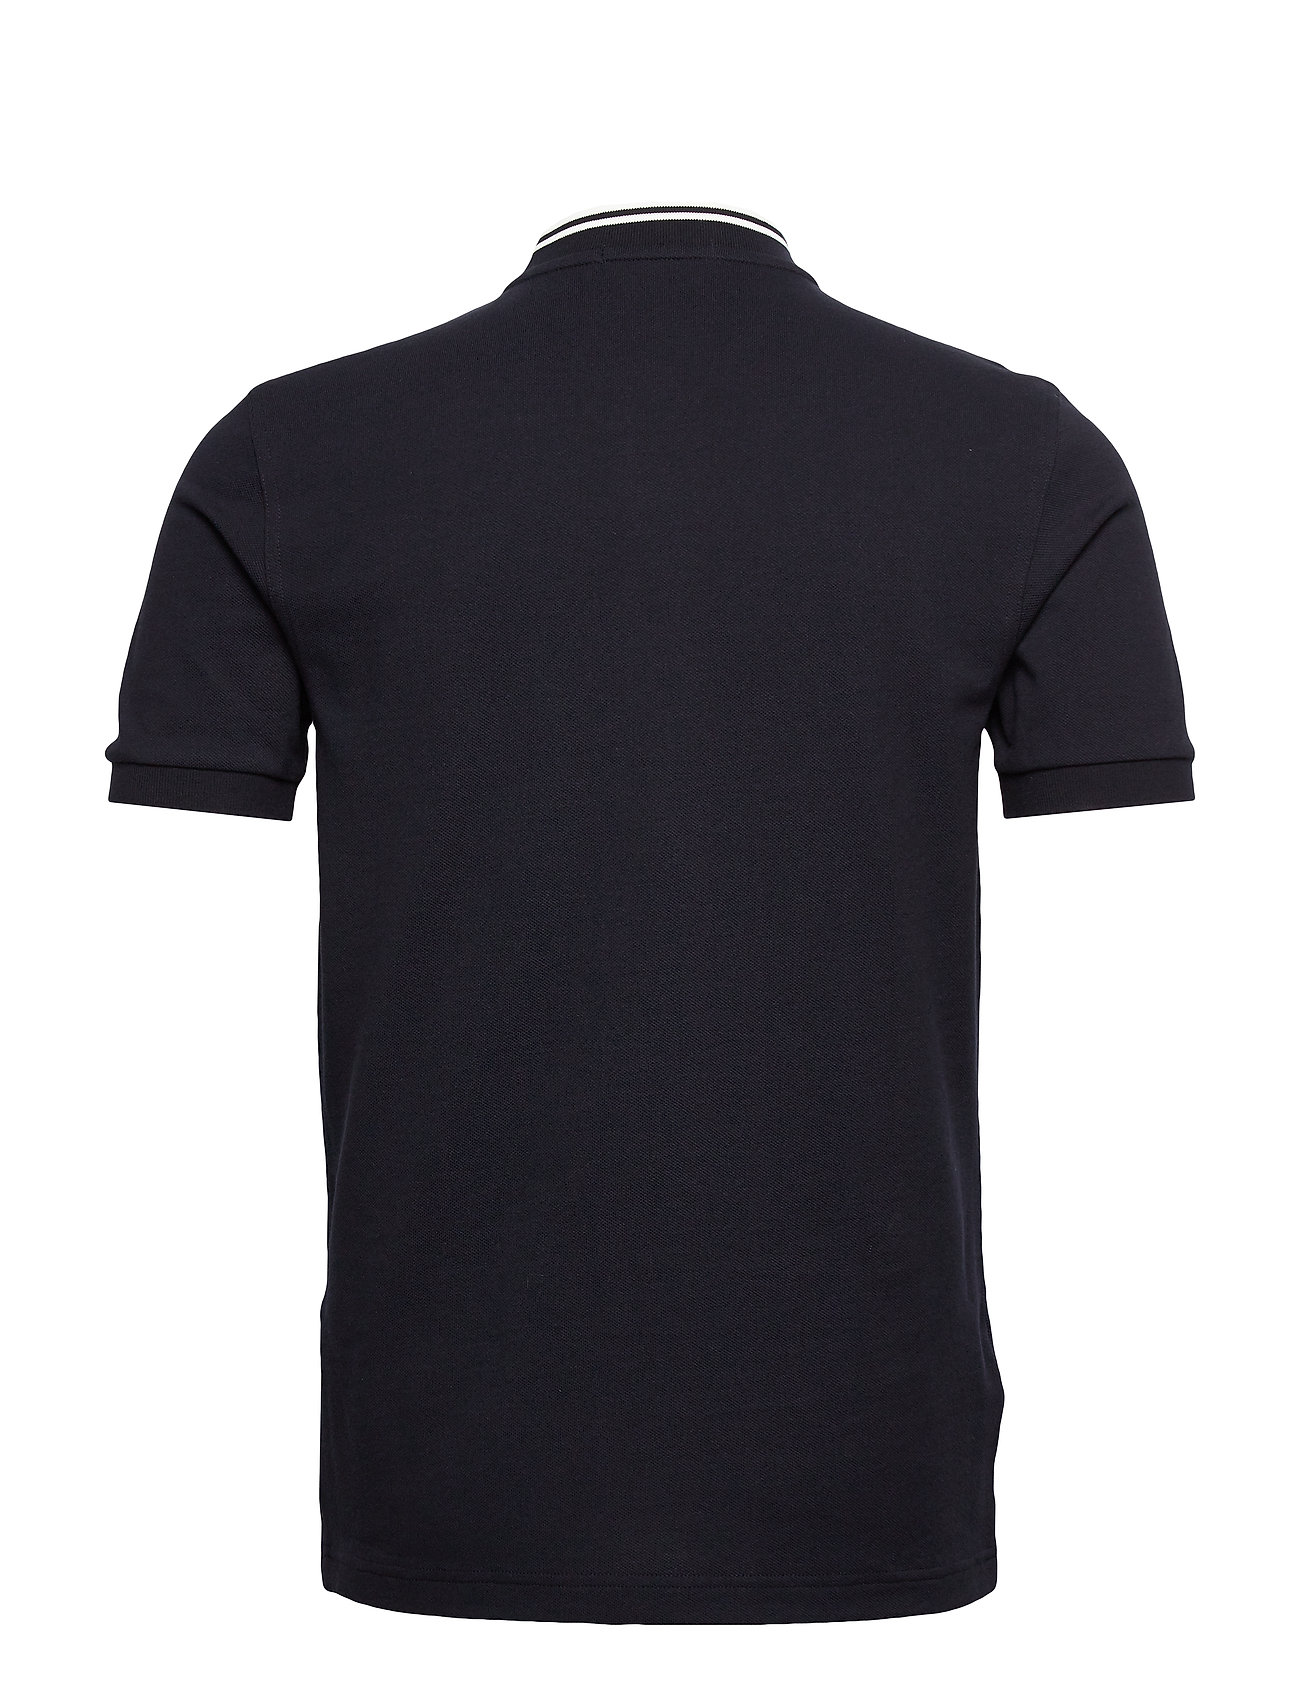 Fred Perry - BOMBER COLLAR POLO - short-sleeved polos - navy - 1